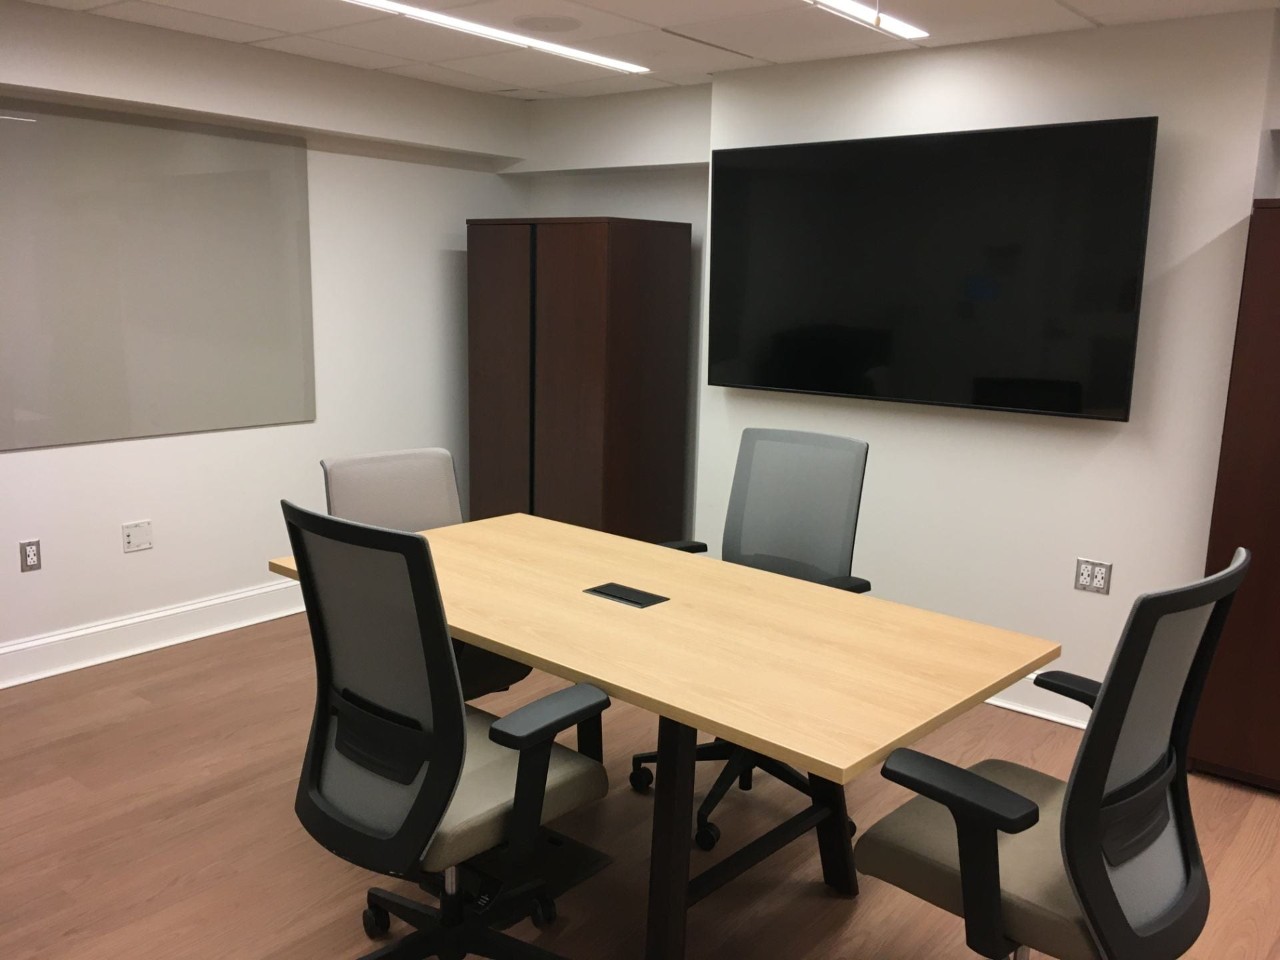 Small meeting room with four chairs around a table, large digital display and glass writing board